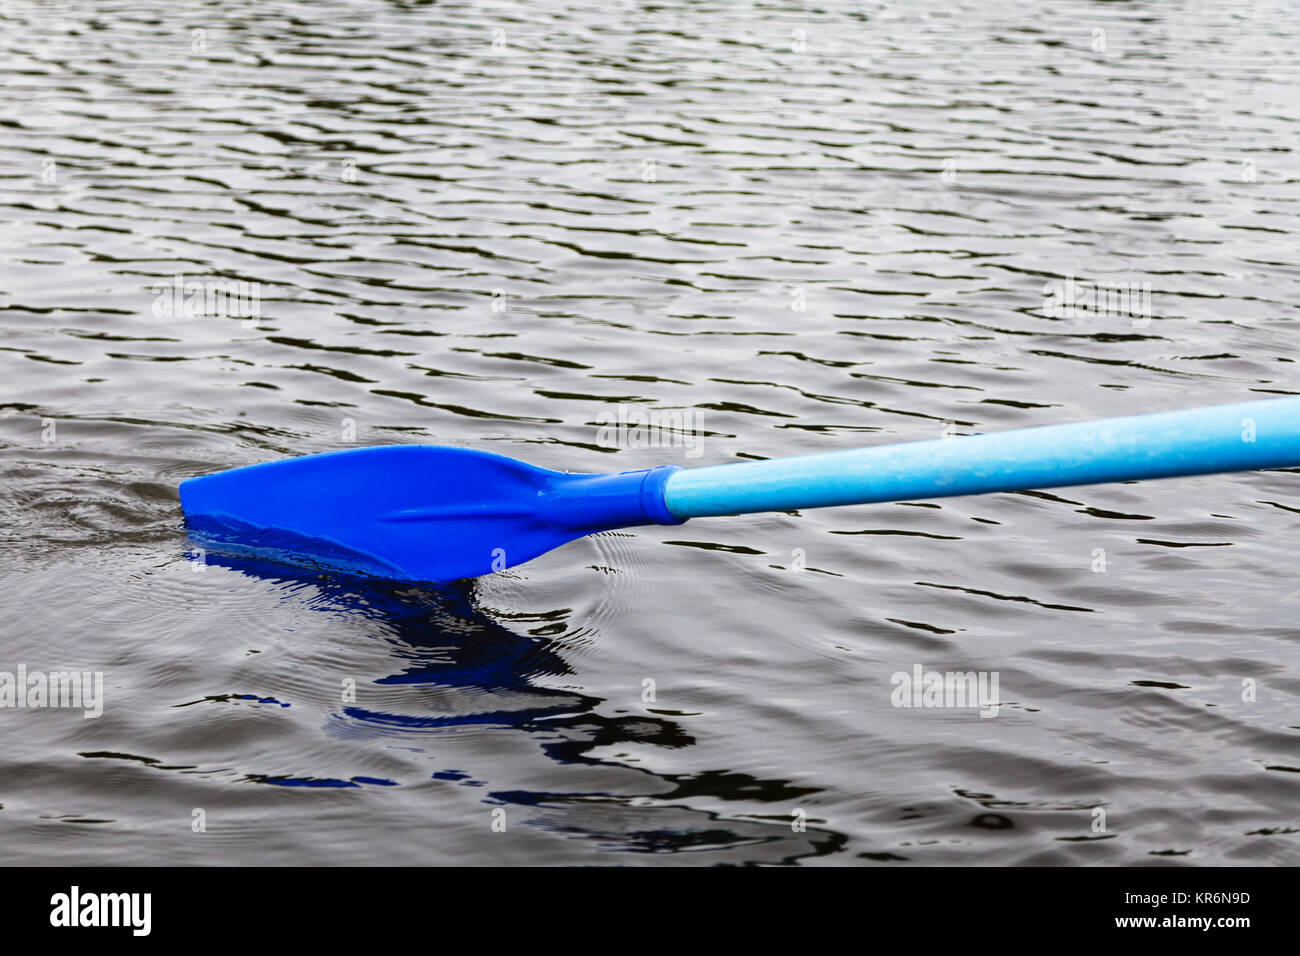 oar blade in water during boating Stock Photo